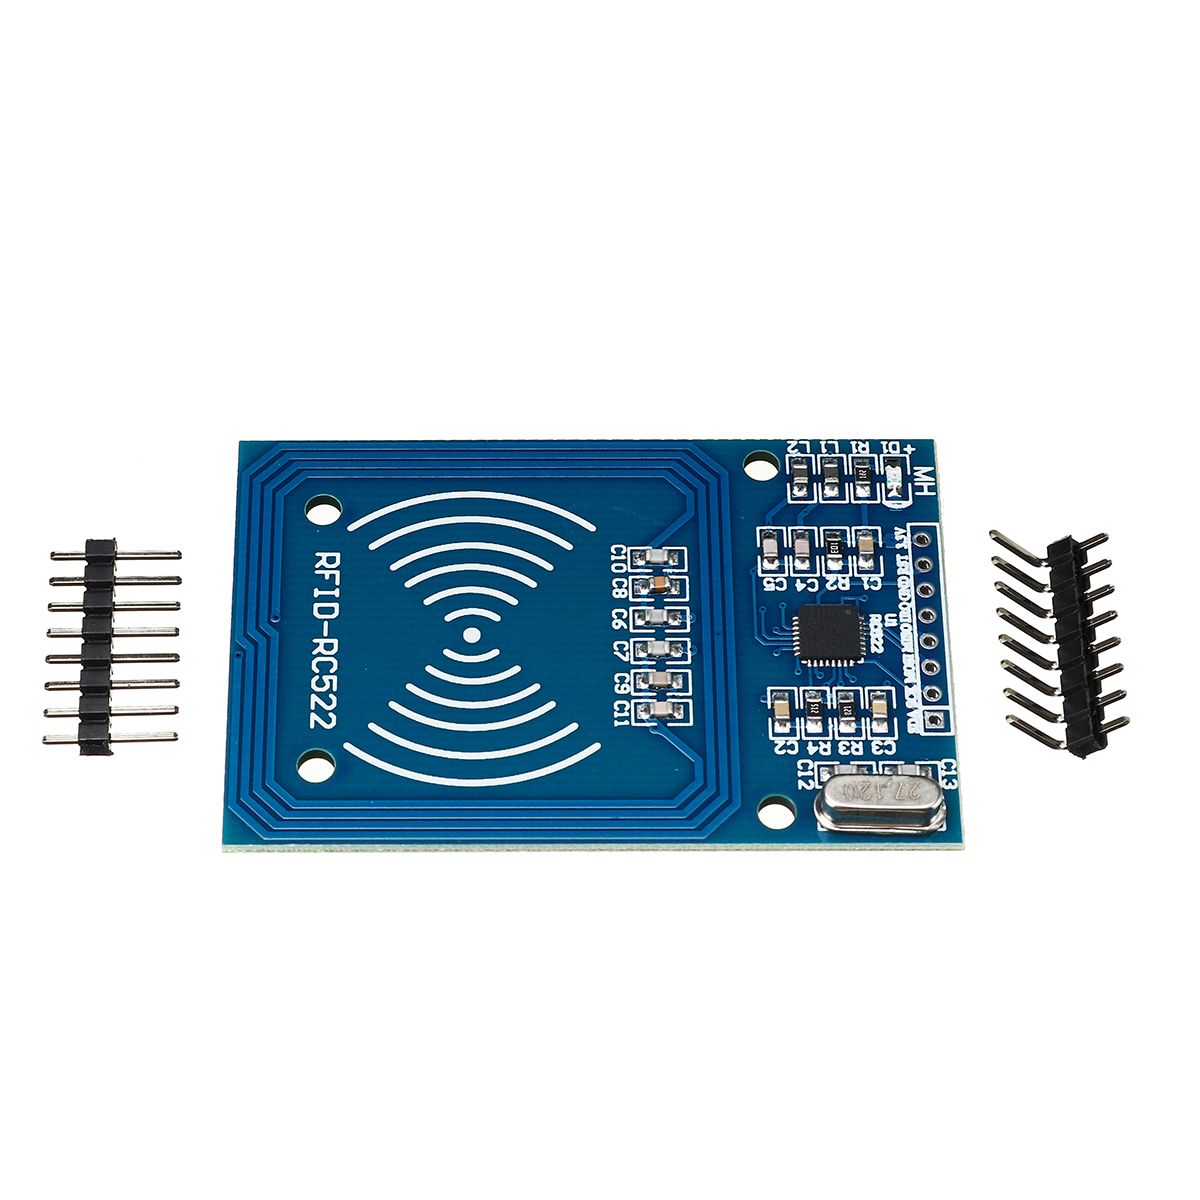 RFID-RC522-RF-IC-Card-Reader-Sensor-Module-with-S50-Blank-Card-and-Key-Ring-for--Raspberry-Pi-40pin--1606037